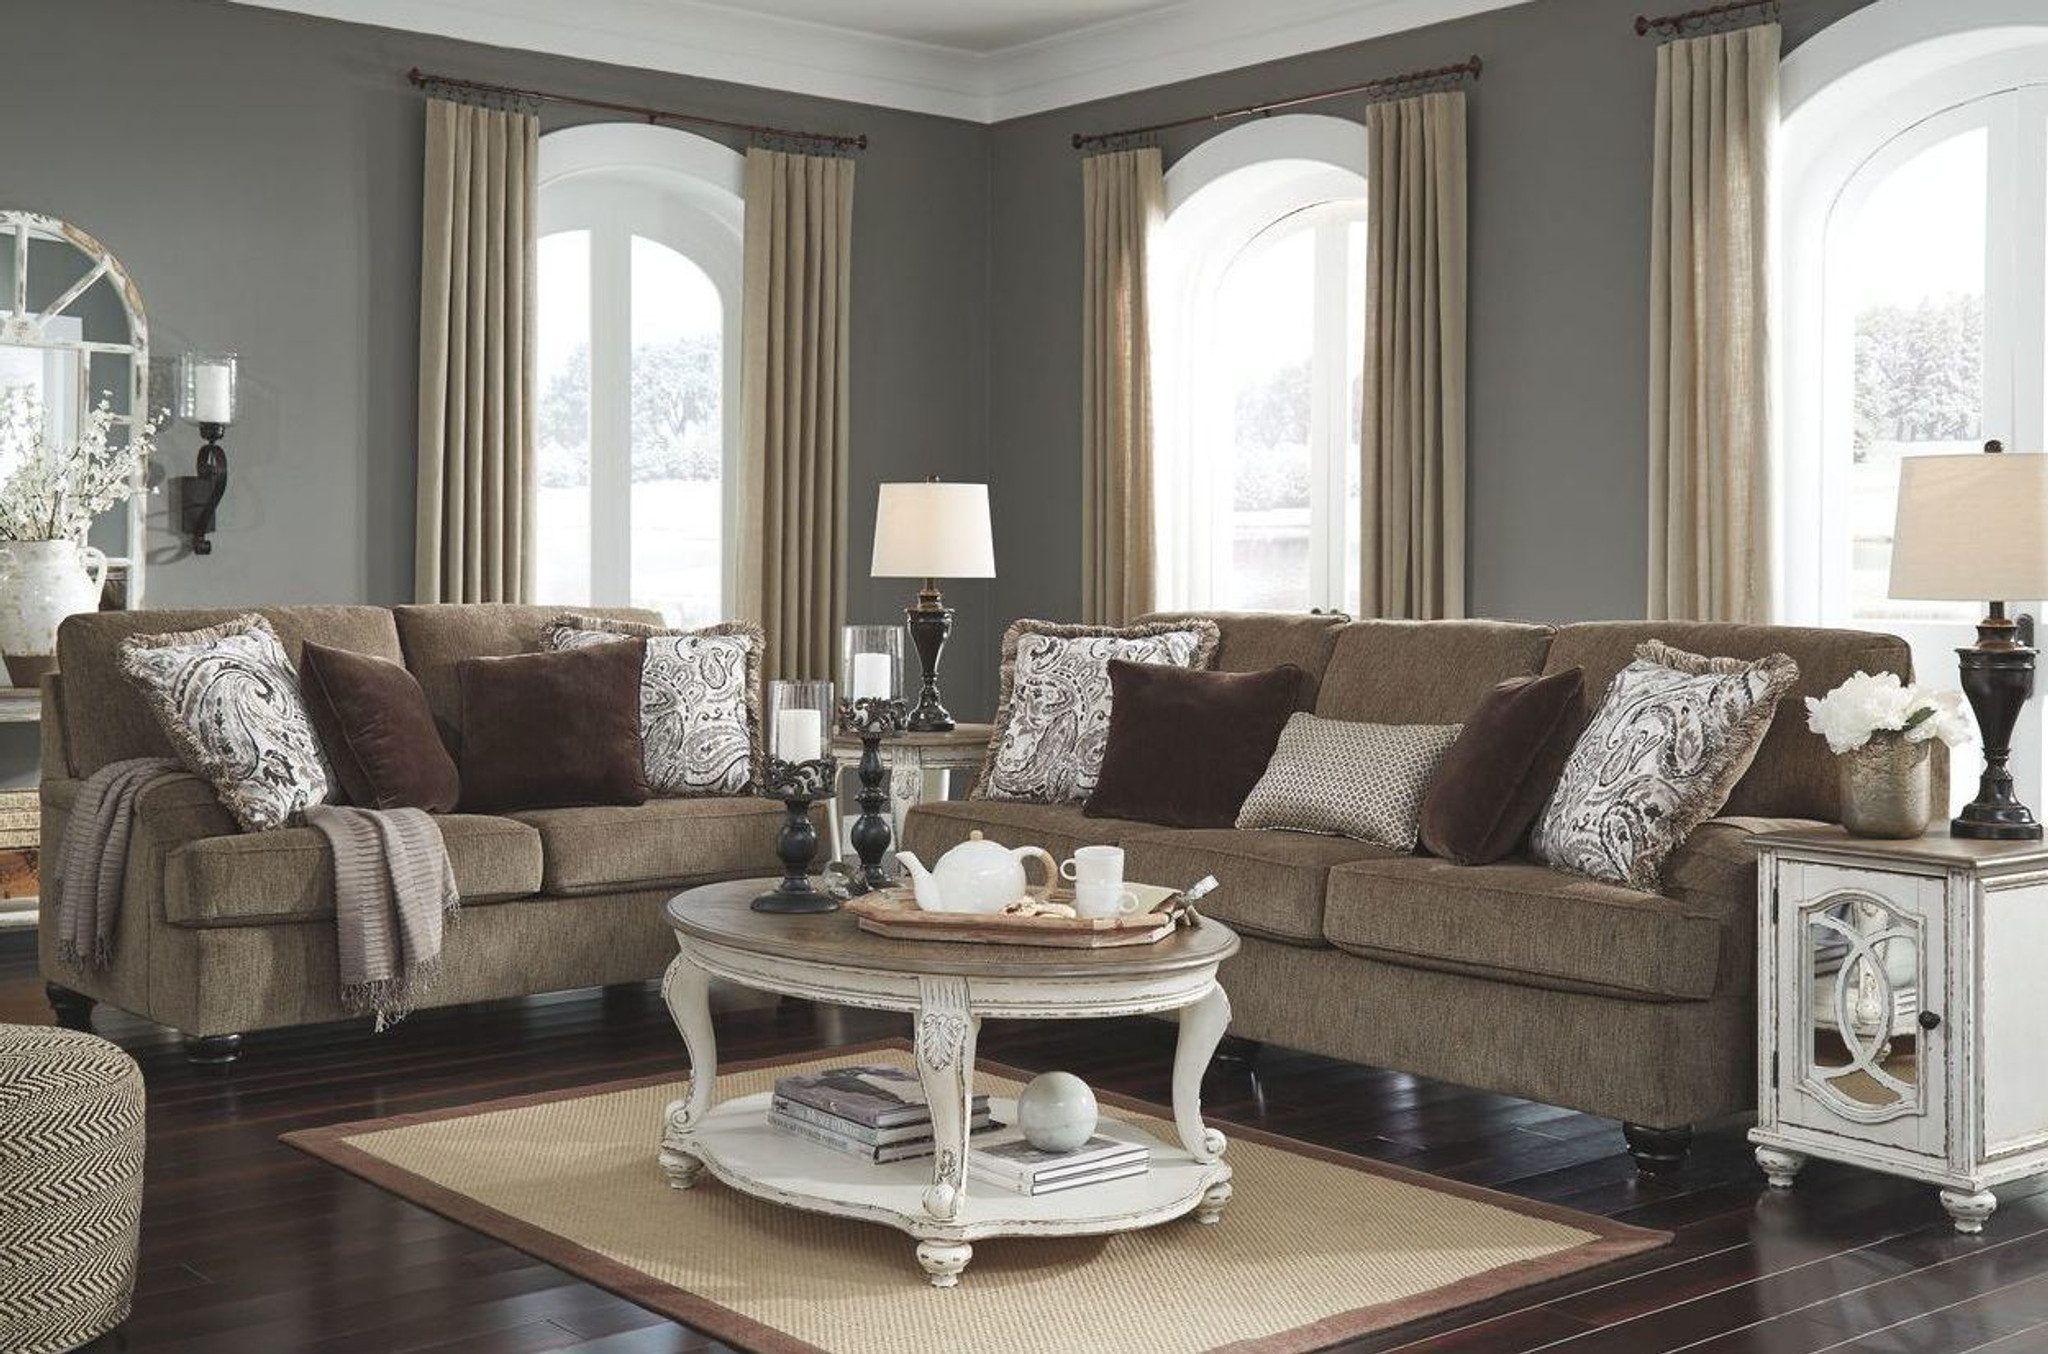 40901 38 35 2 Pcs Braemar Brown Sofa Loveseat Collection By